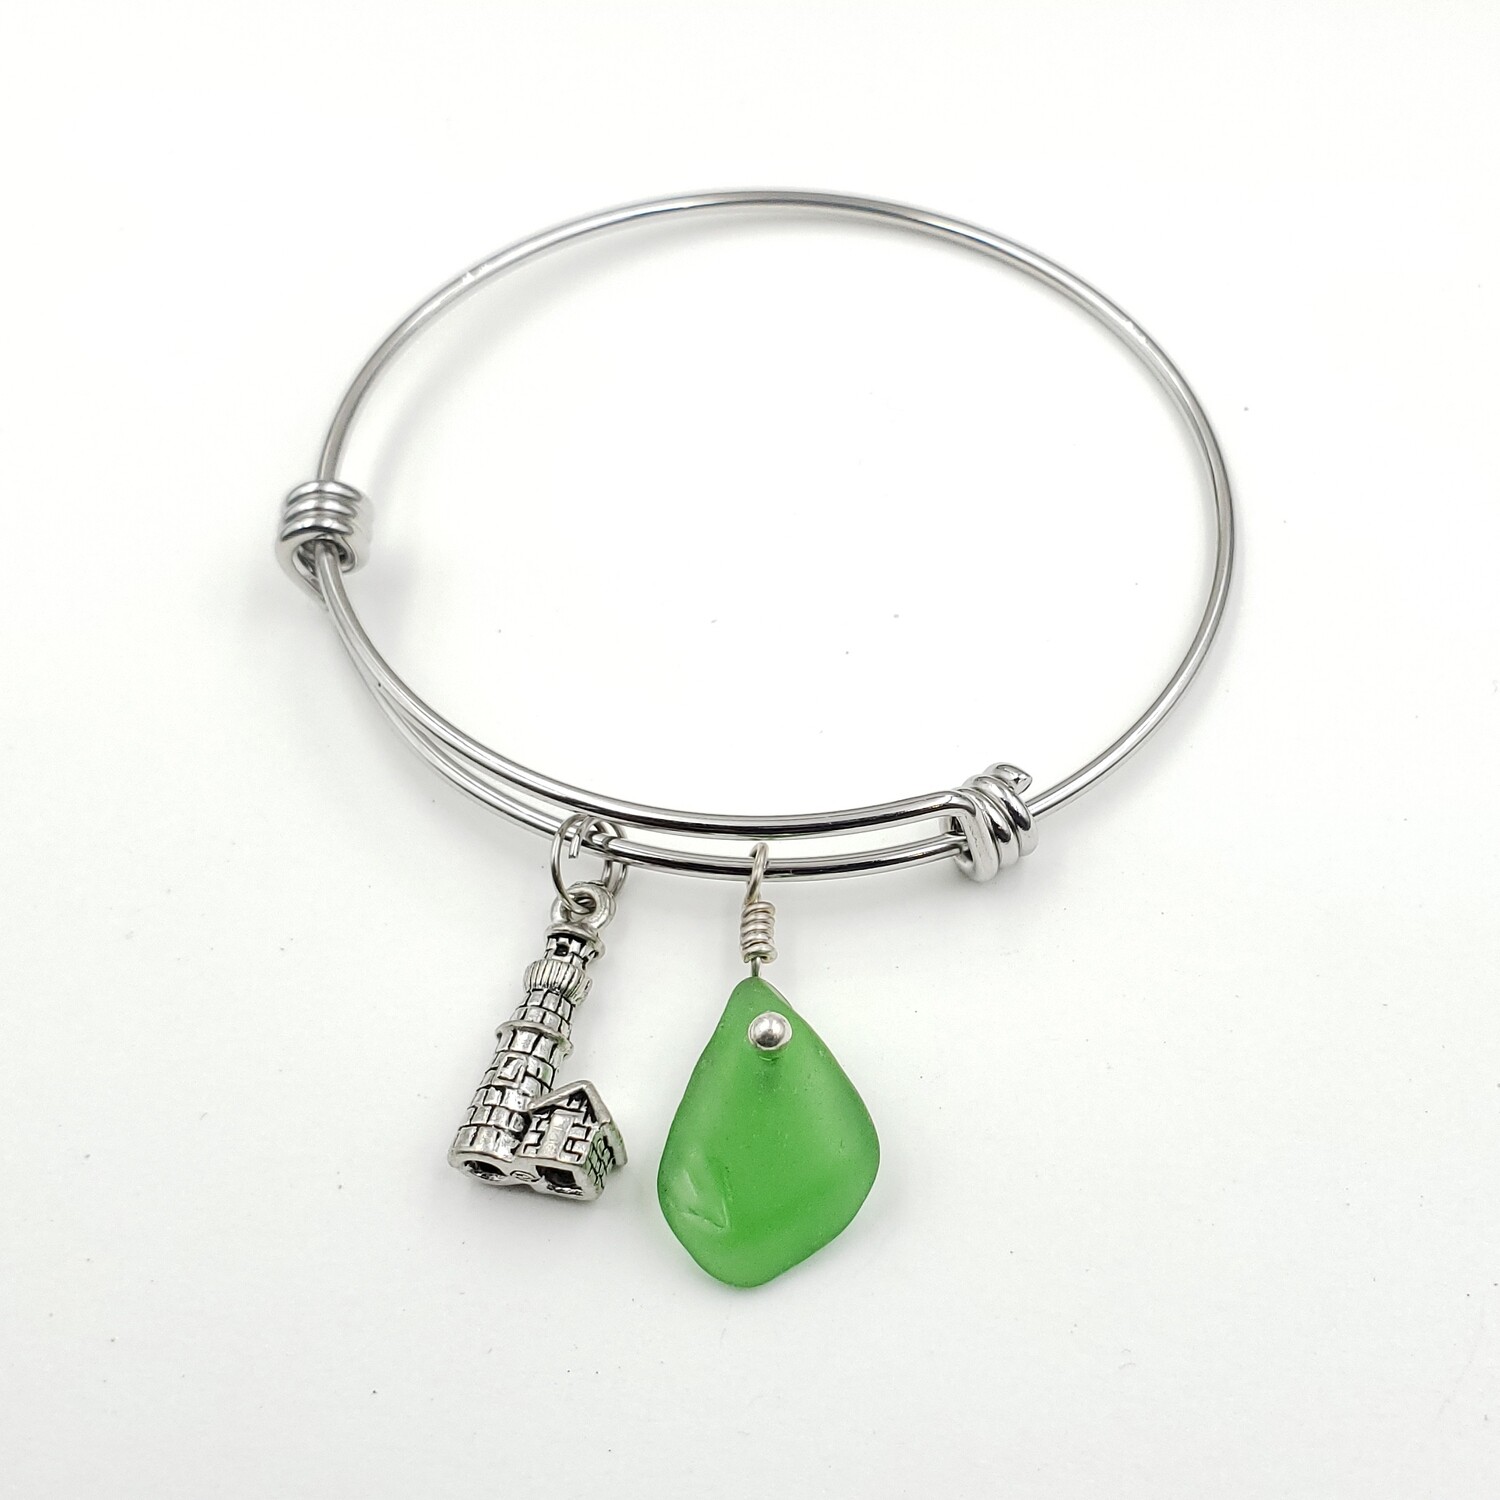 Bangle Bracelet with Lighthouse Charm and Green Lake Erie Beach Glass